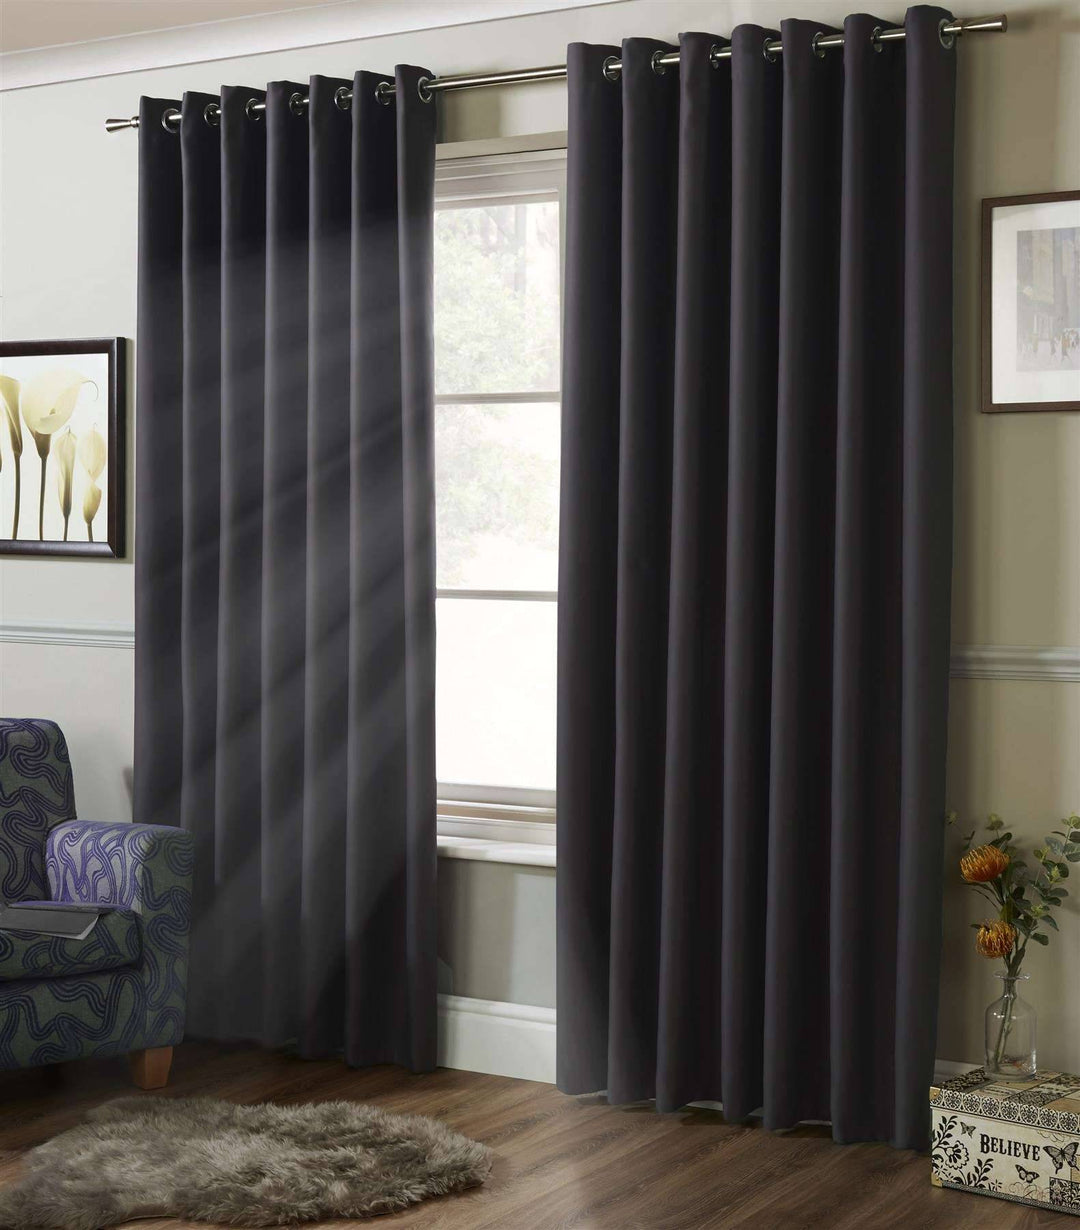 100% Blackout (Ring Top Curtains) - TidySpaces